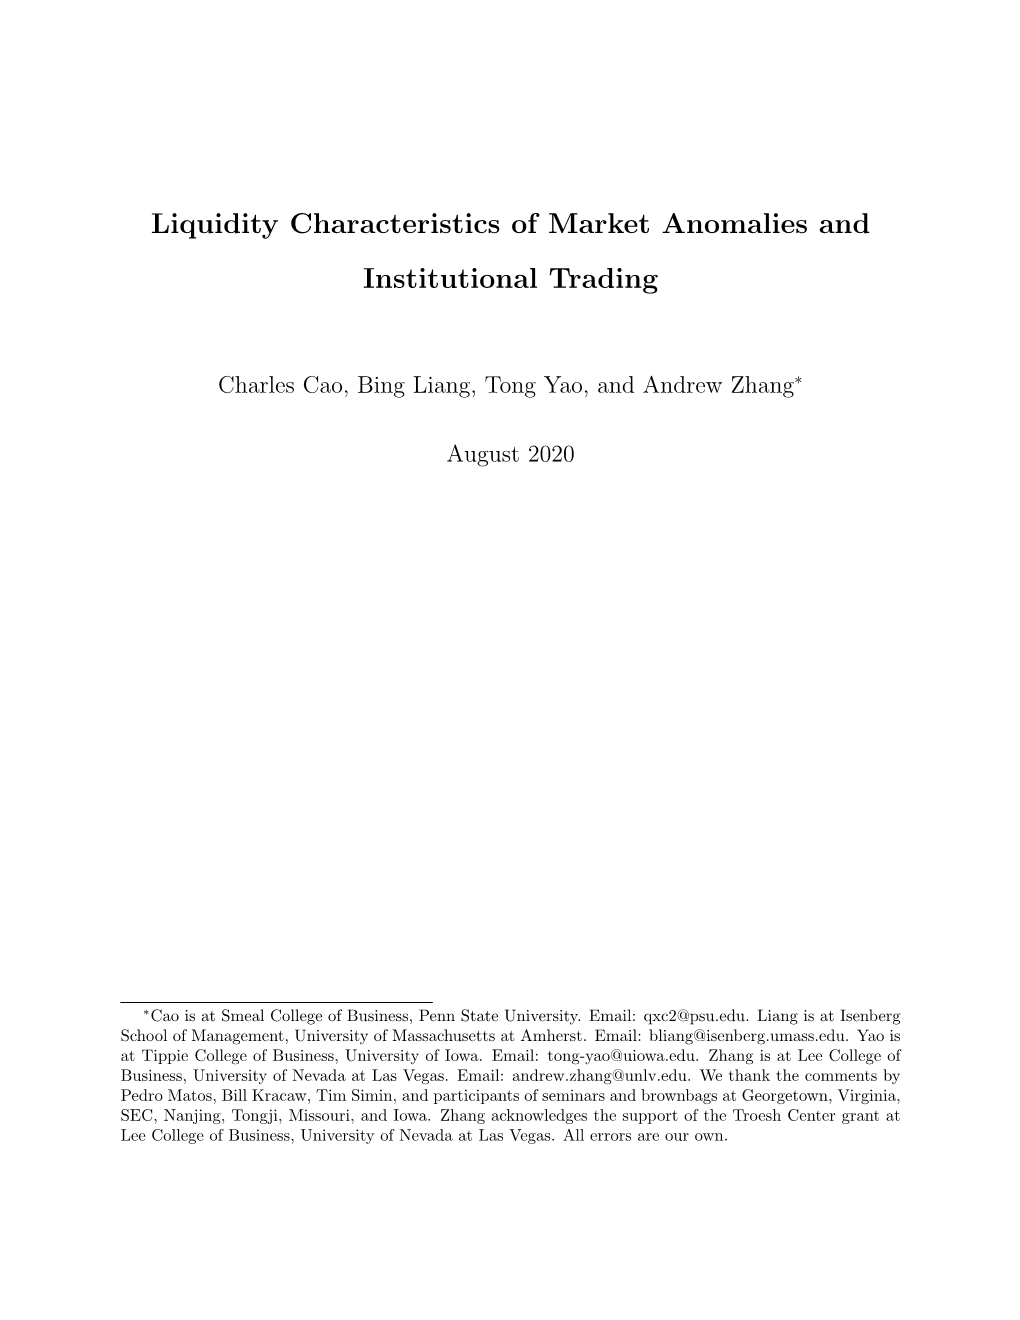 Liquidity Characteristics of Market Anomalies and Institutional Trading